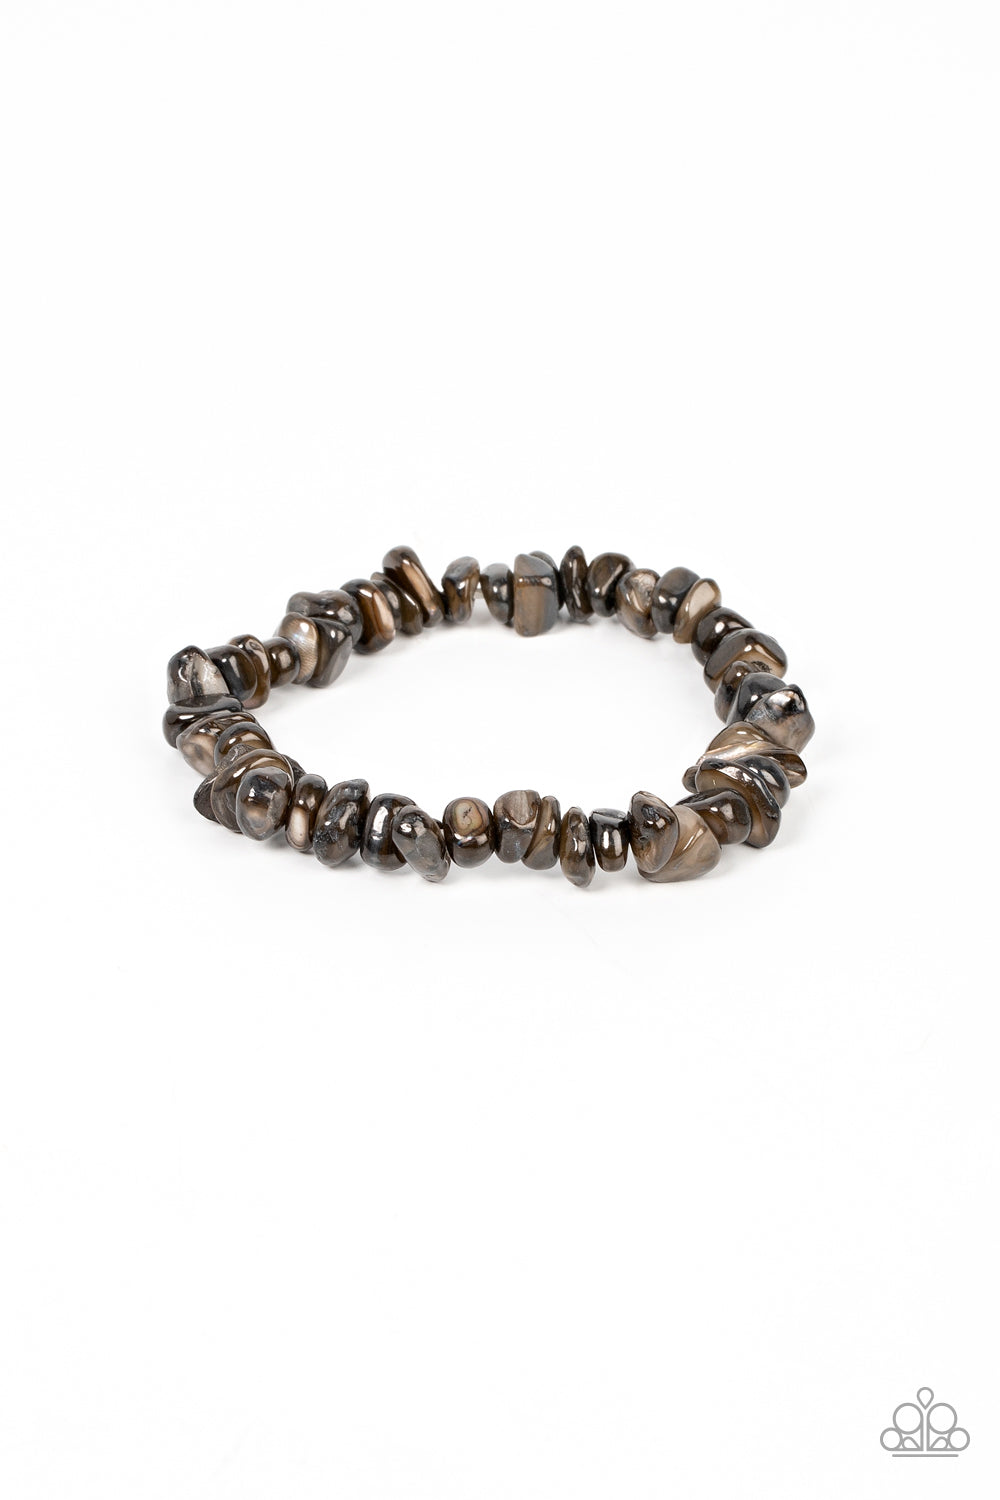 Grounded for Life Black Urban Bracelet - Paparazzi Accessories  An earthy assortment of shiny black pebble-like stones are threaded along a stretchy band around the wrist, resulting in a grounding pop of color.  Sold as one individual bracelet.